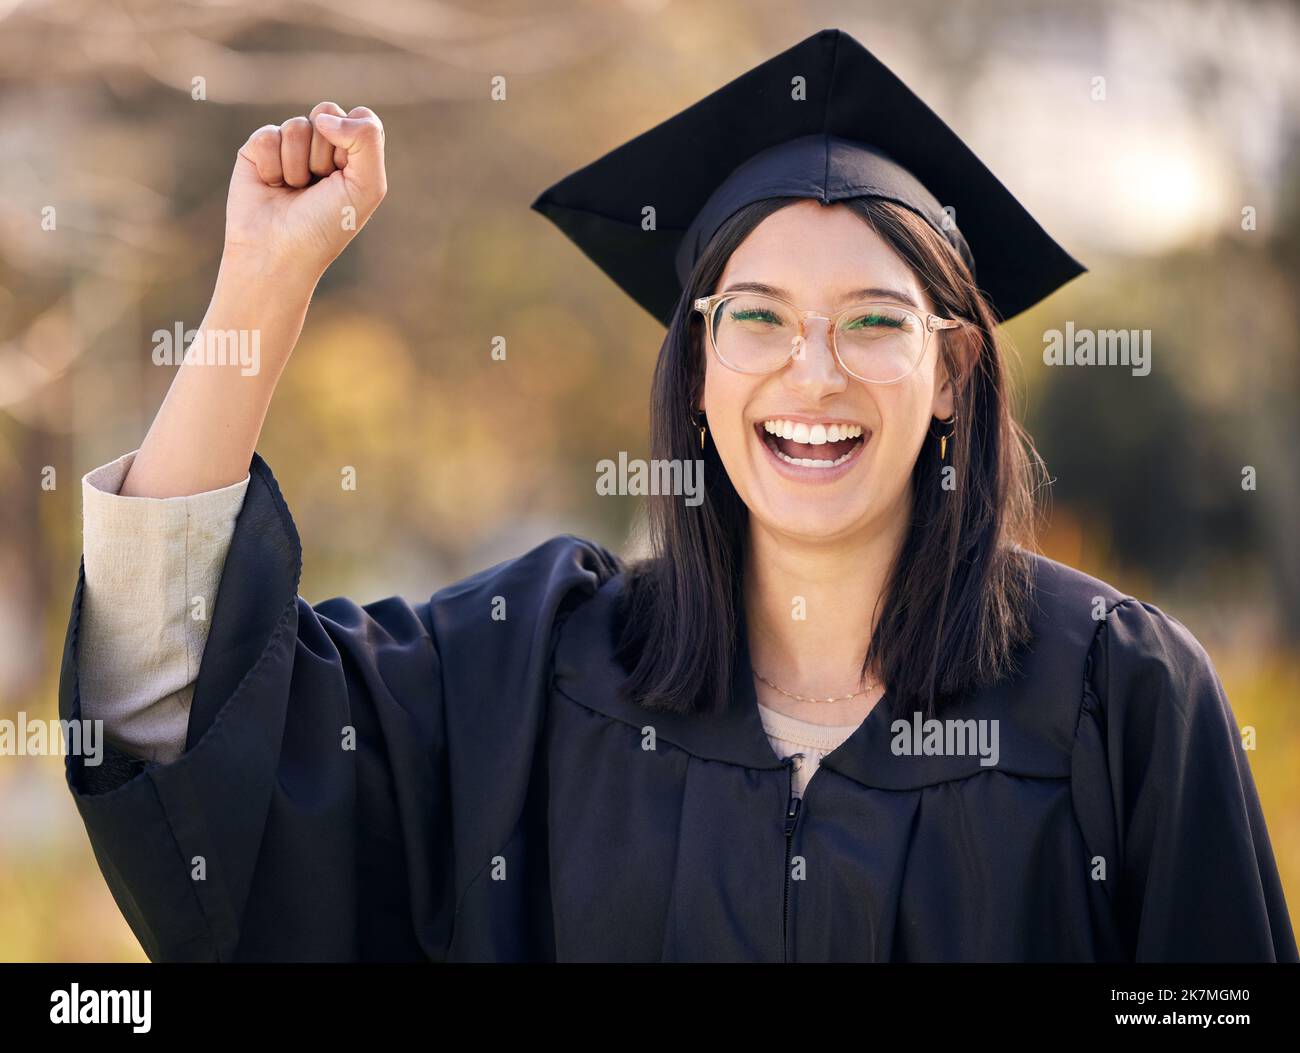 Now go fourth and conquer. a young woman cheering on graduation day. Stock Photo